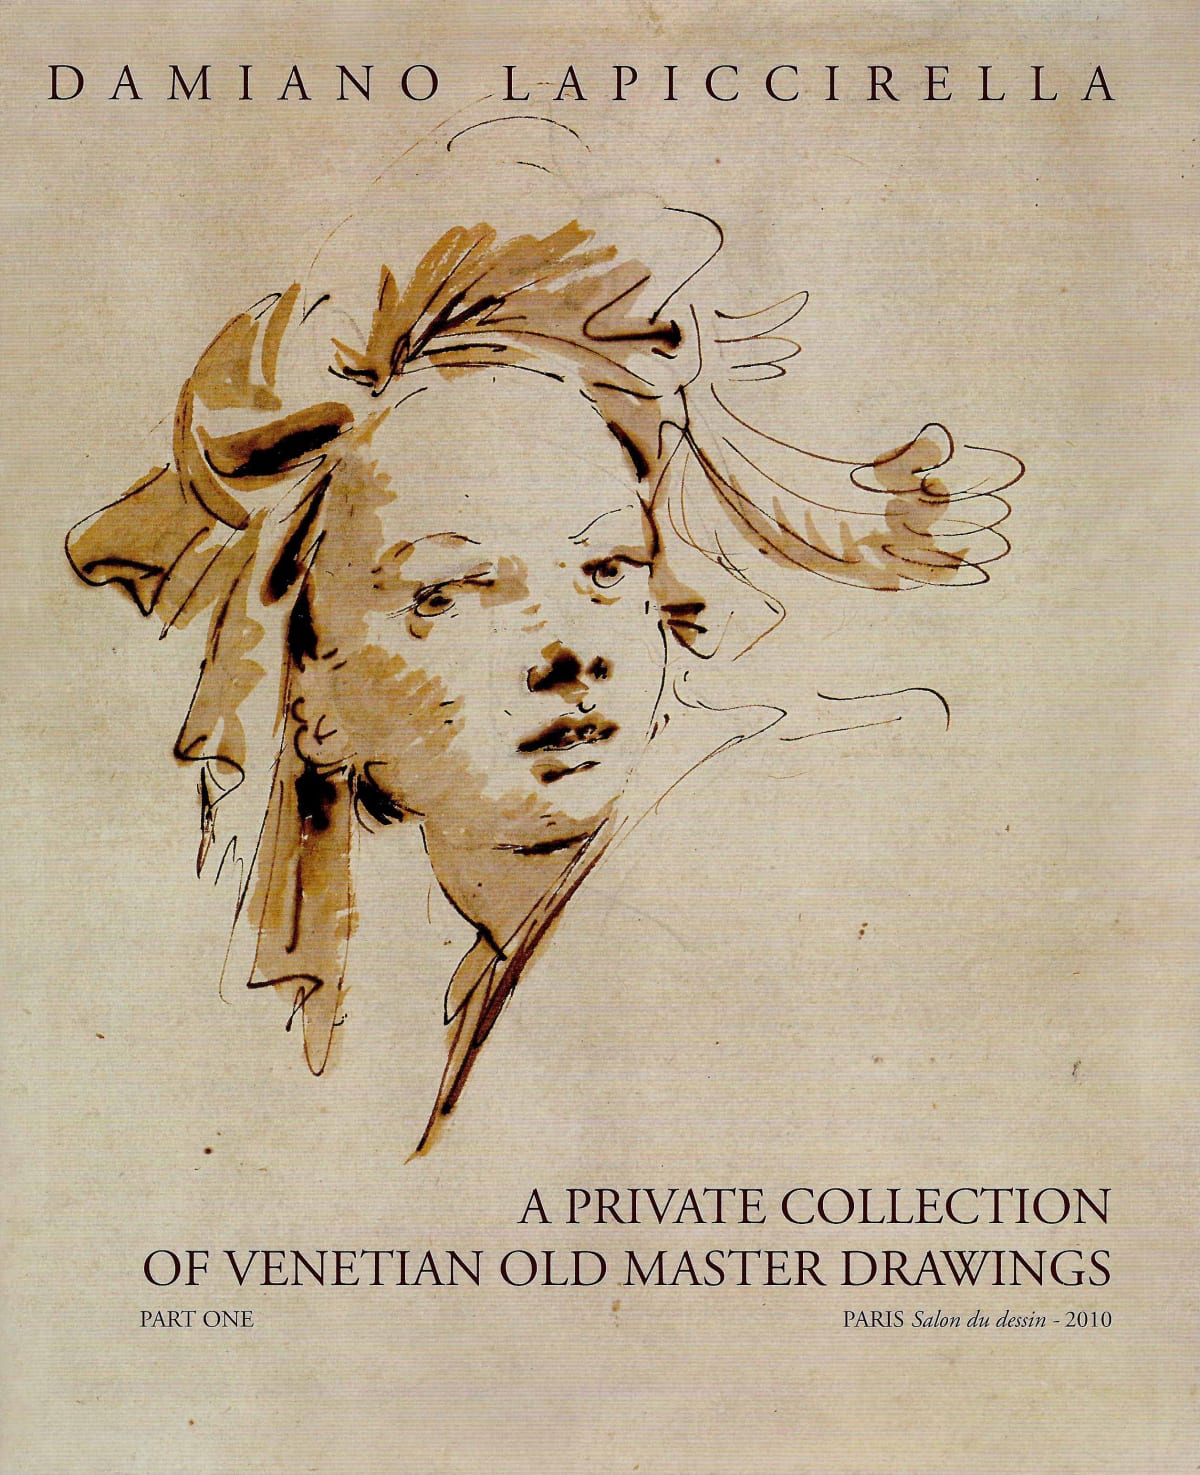 A private collection of Venetian Old Master Drawings